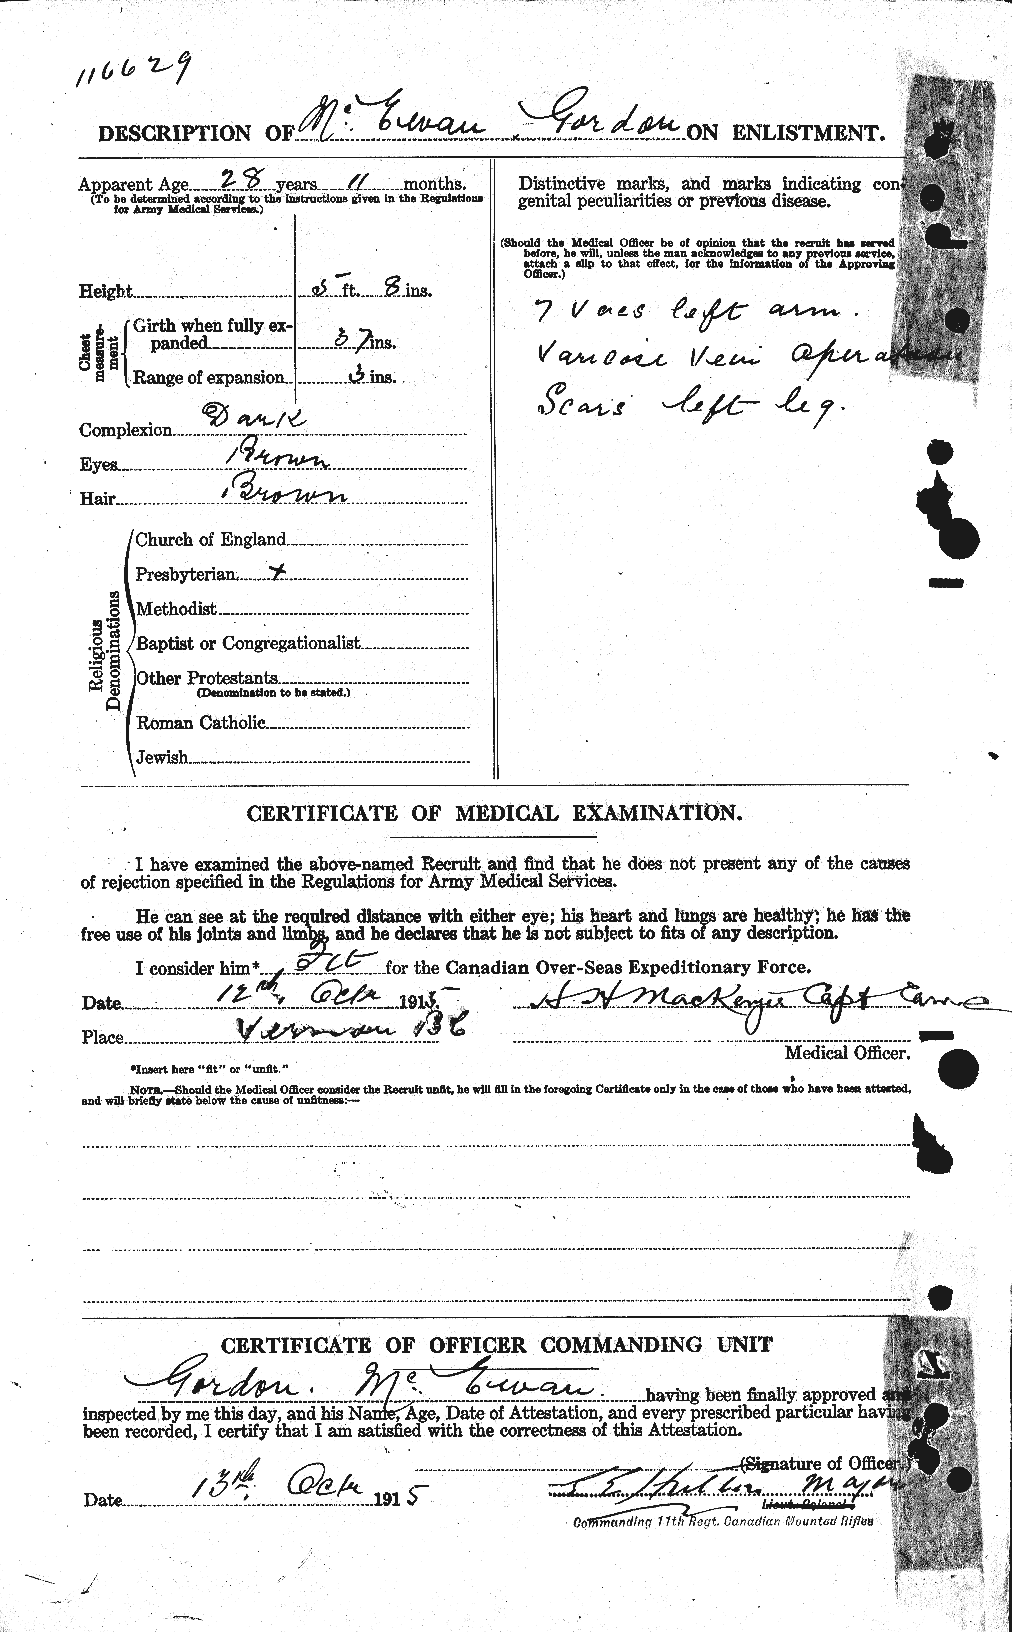 Personnel Records of the First World War - CEF 522220b